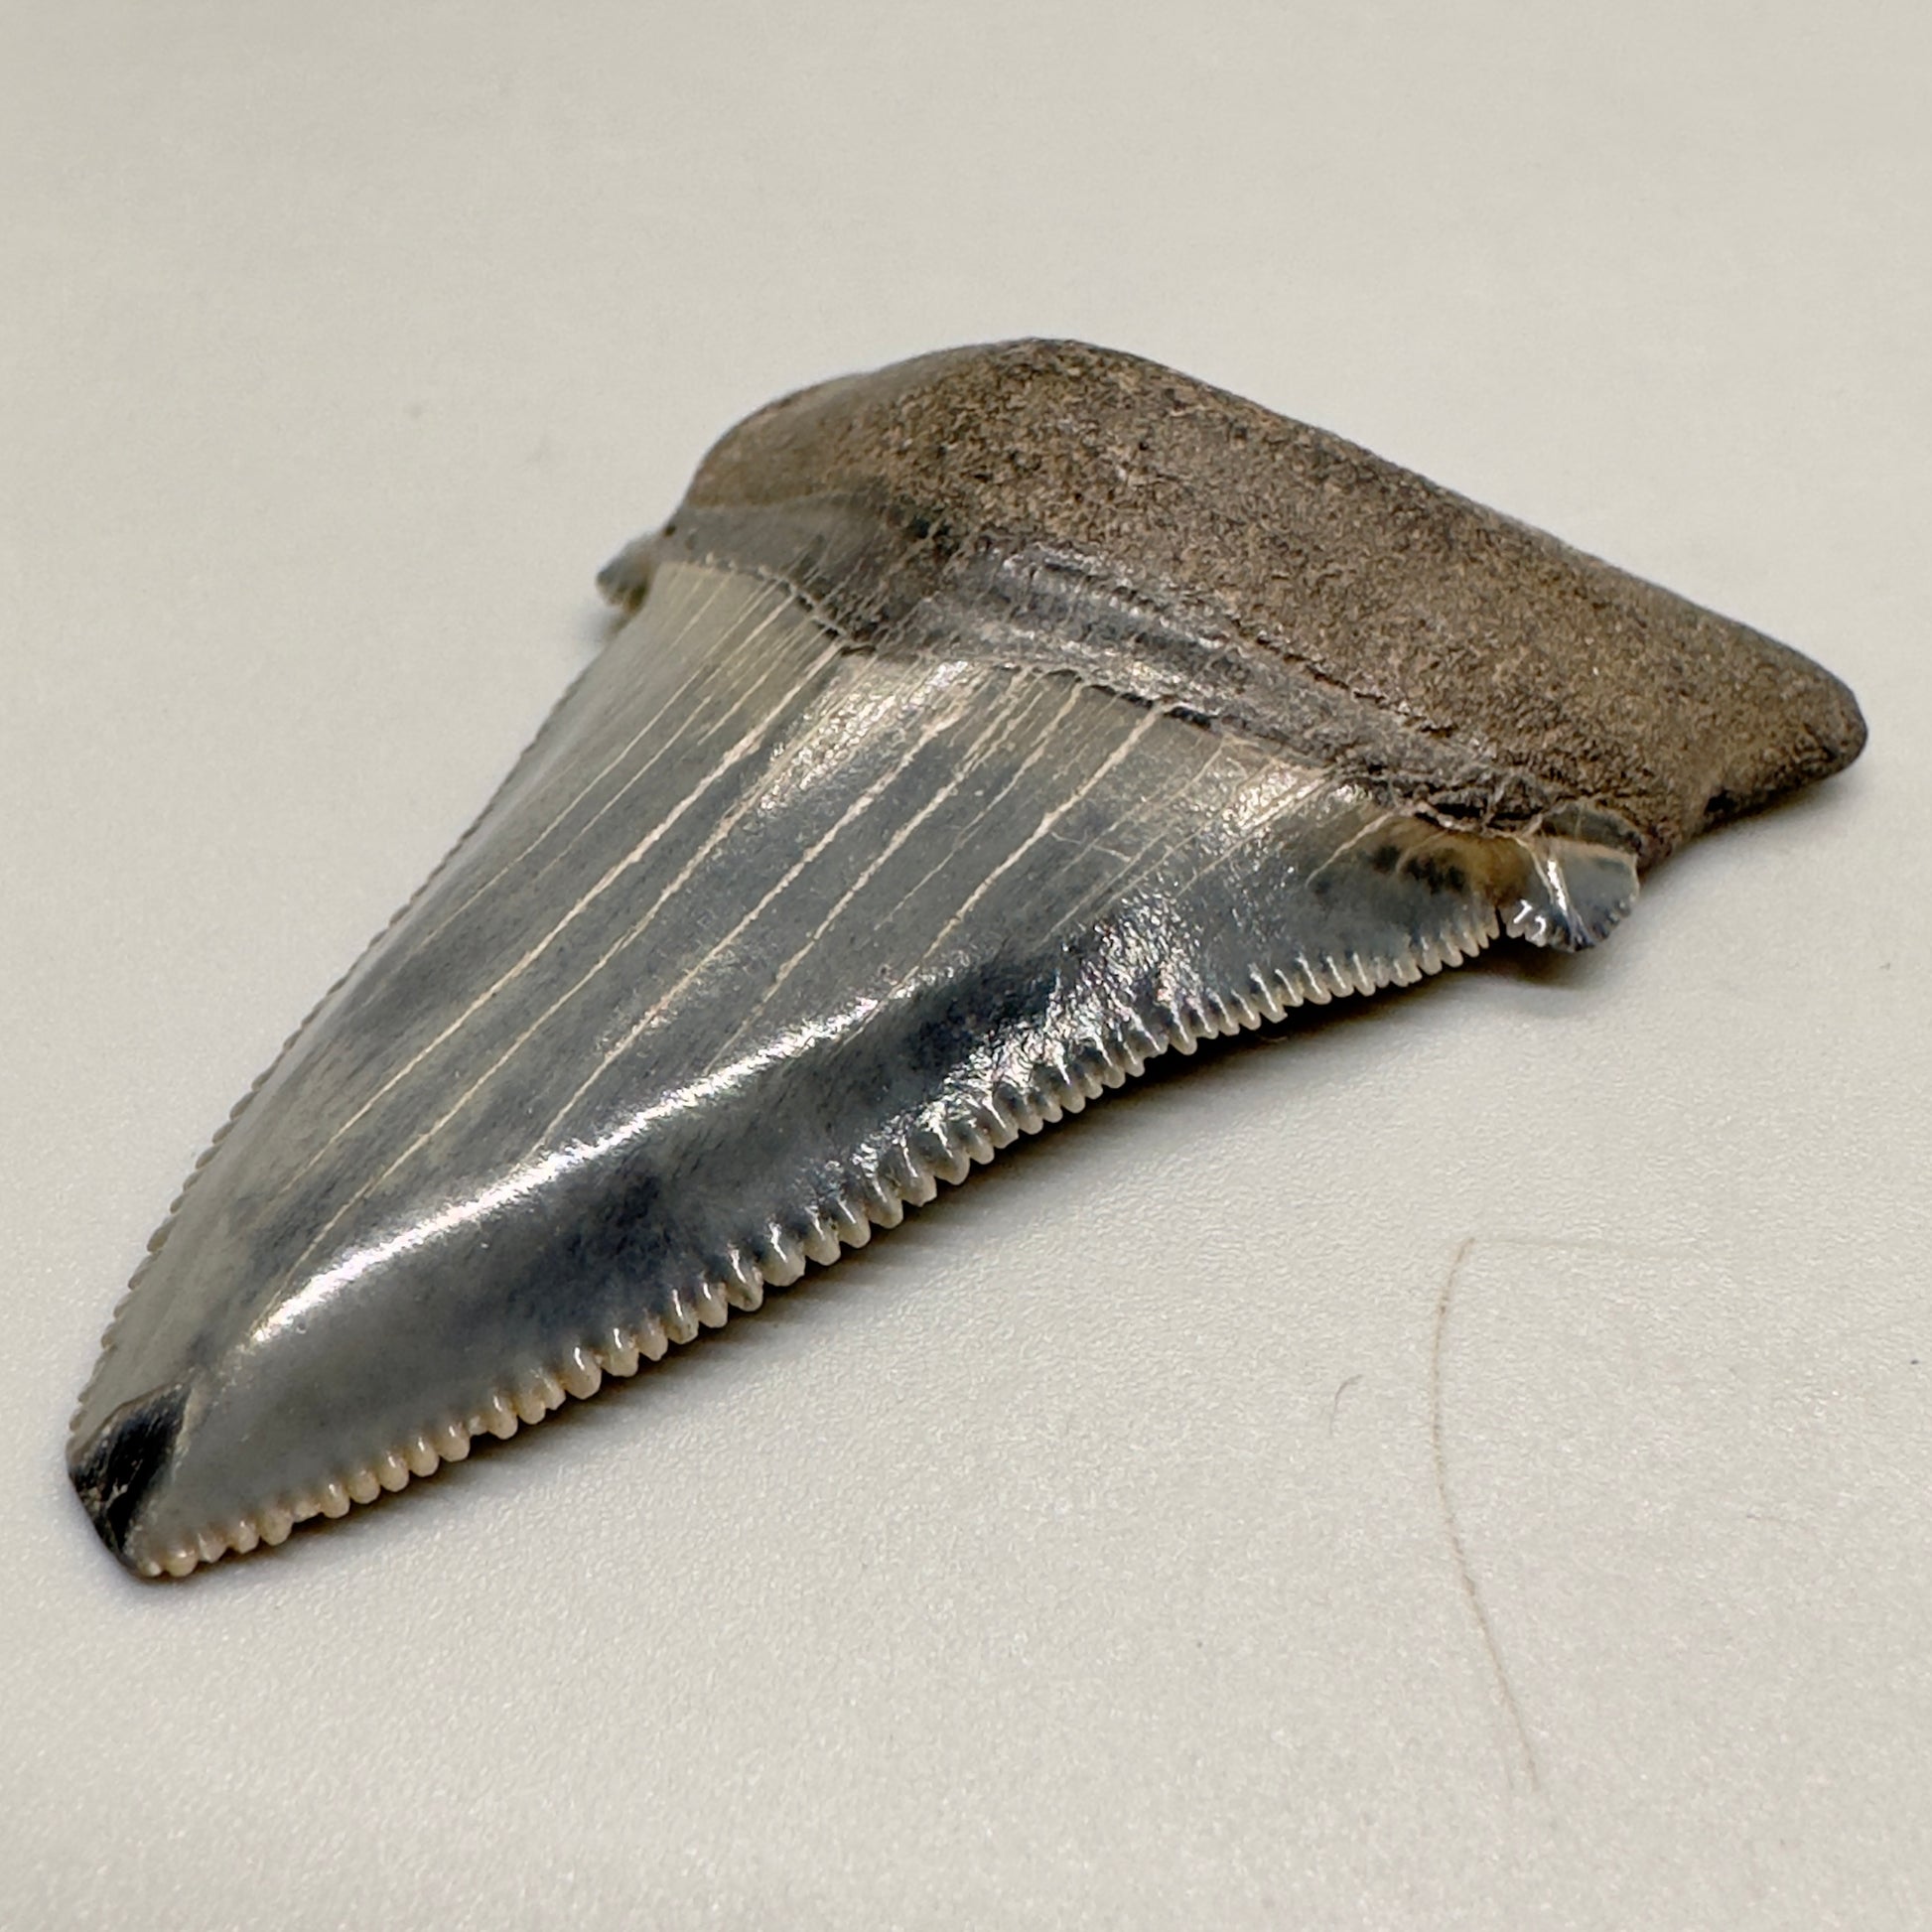 Colorful serrated 2.39 inch Carcharocles angustidens shark tooth from South Carolina AN402 front right